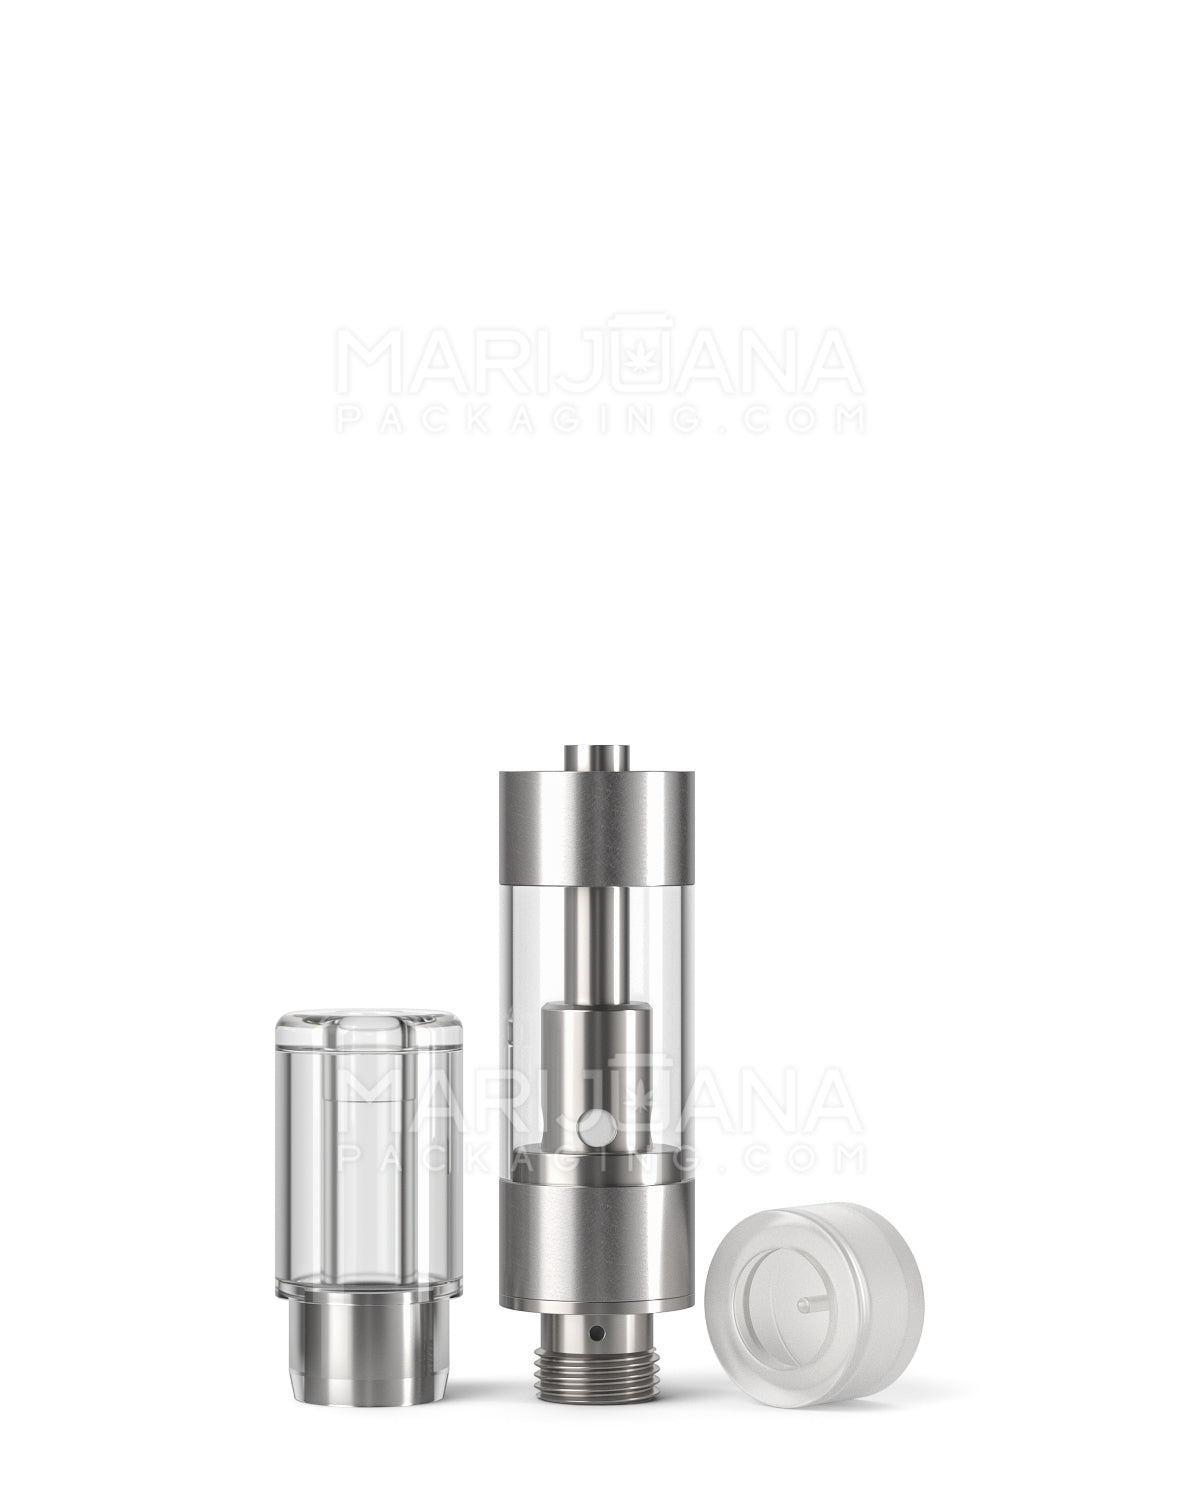 CCELL | Liquid6 Reactor Plastic Vape Cartridge with Barrel Clear Plastic Mouthpiece | 0.5mL - Press On - 100 Count - 5